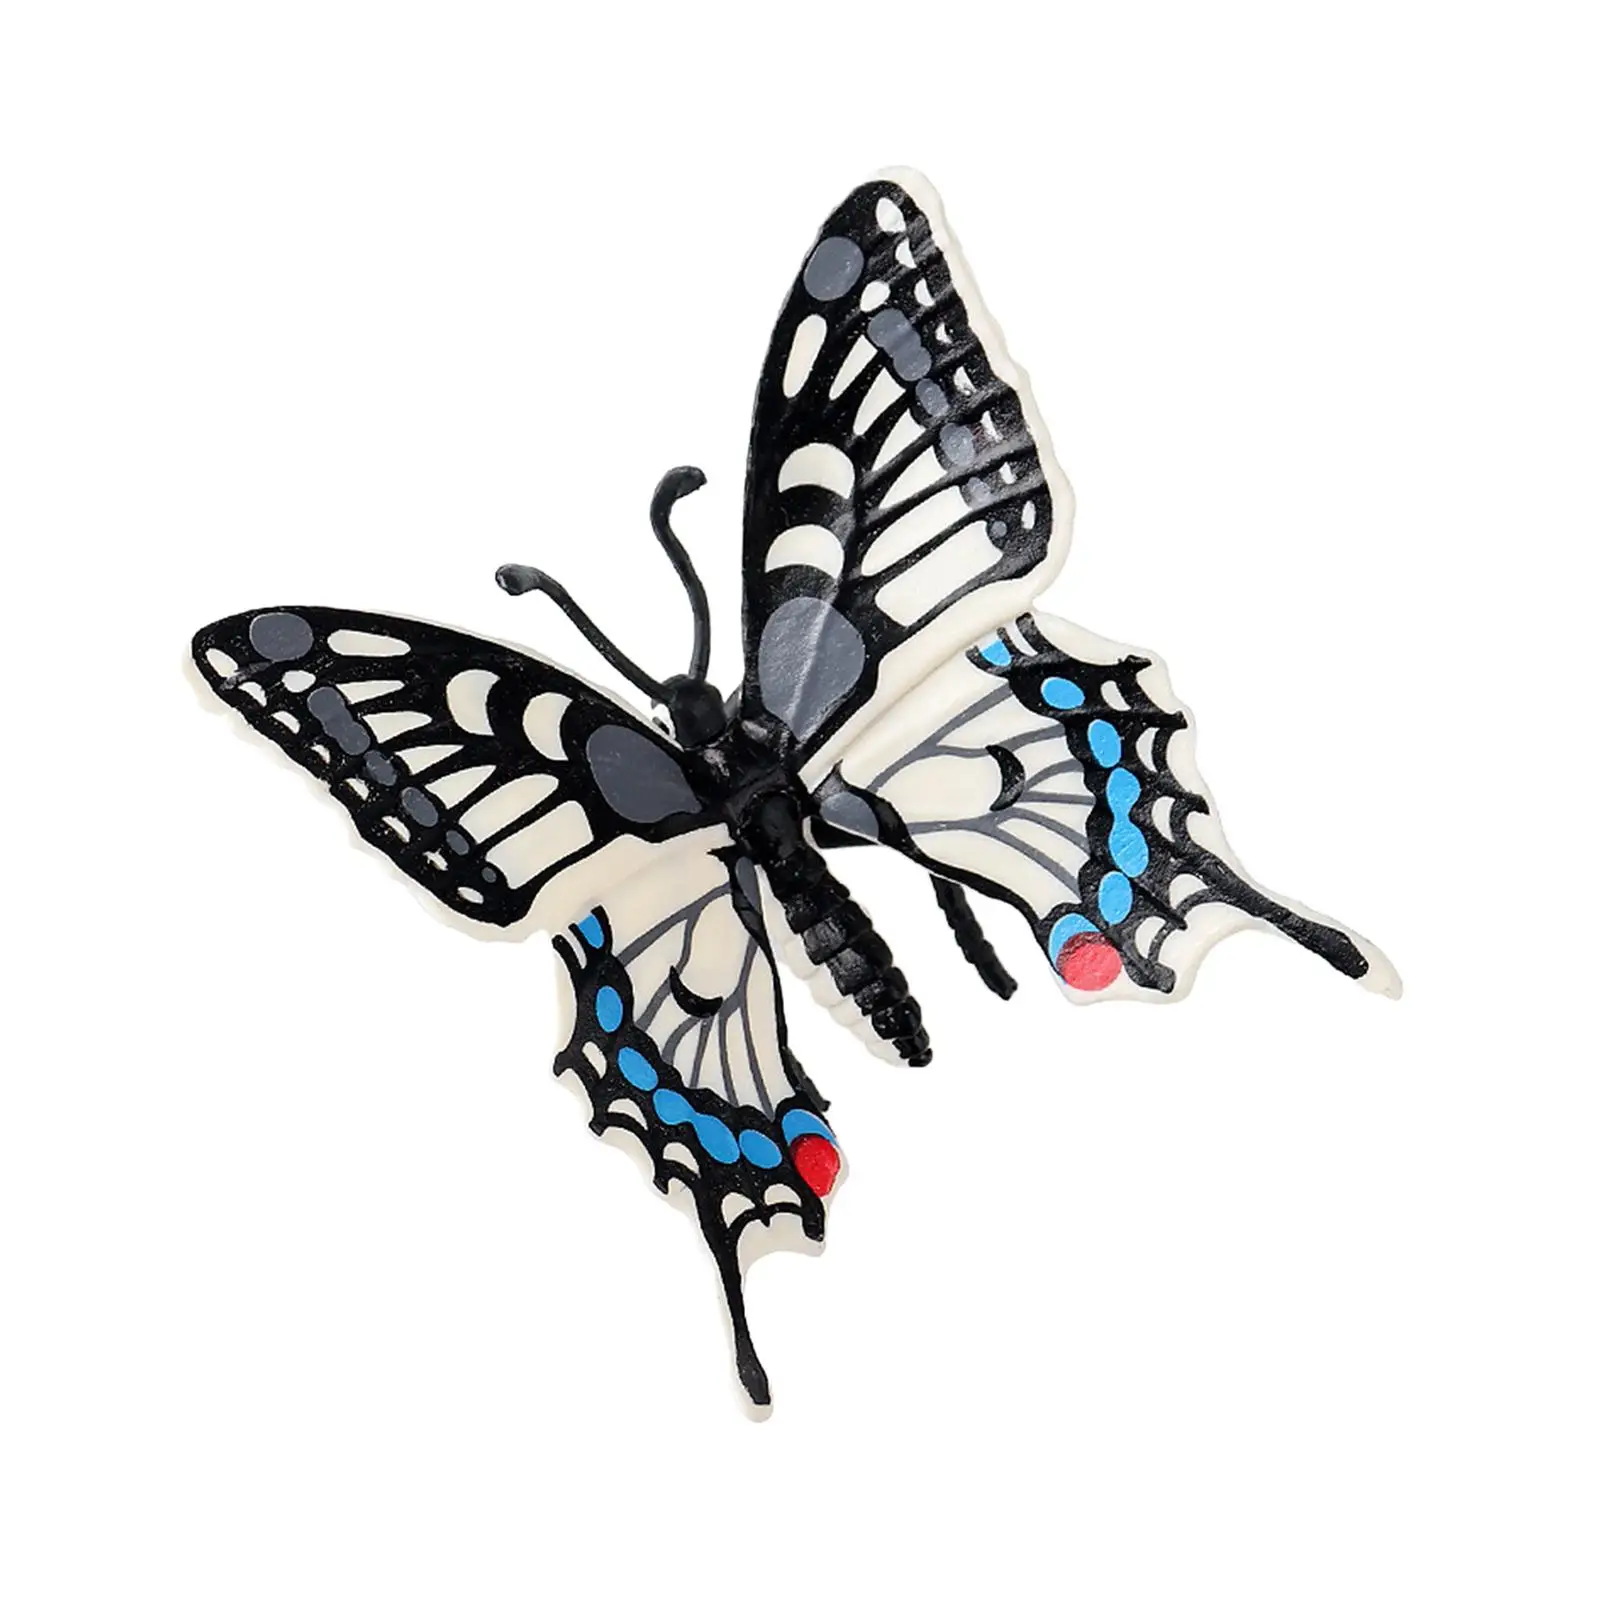 Butterfly Animal Model Realistic Swallowtail Butterfly for Bath Toys Photo Props Party Favors Cake Toppers Teaching Aids